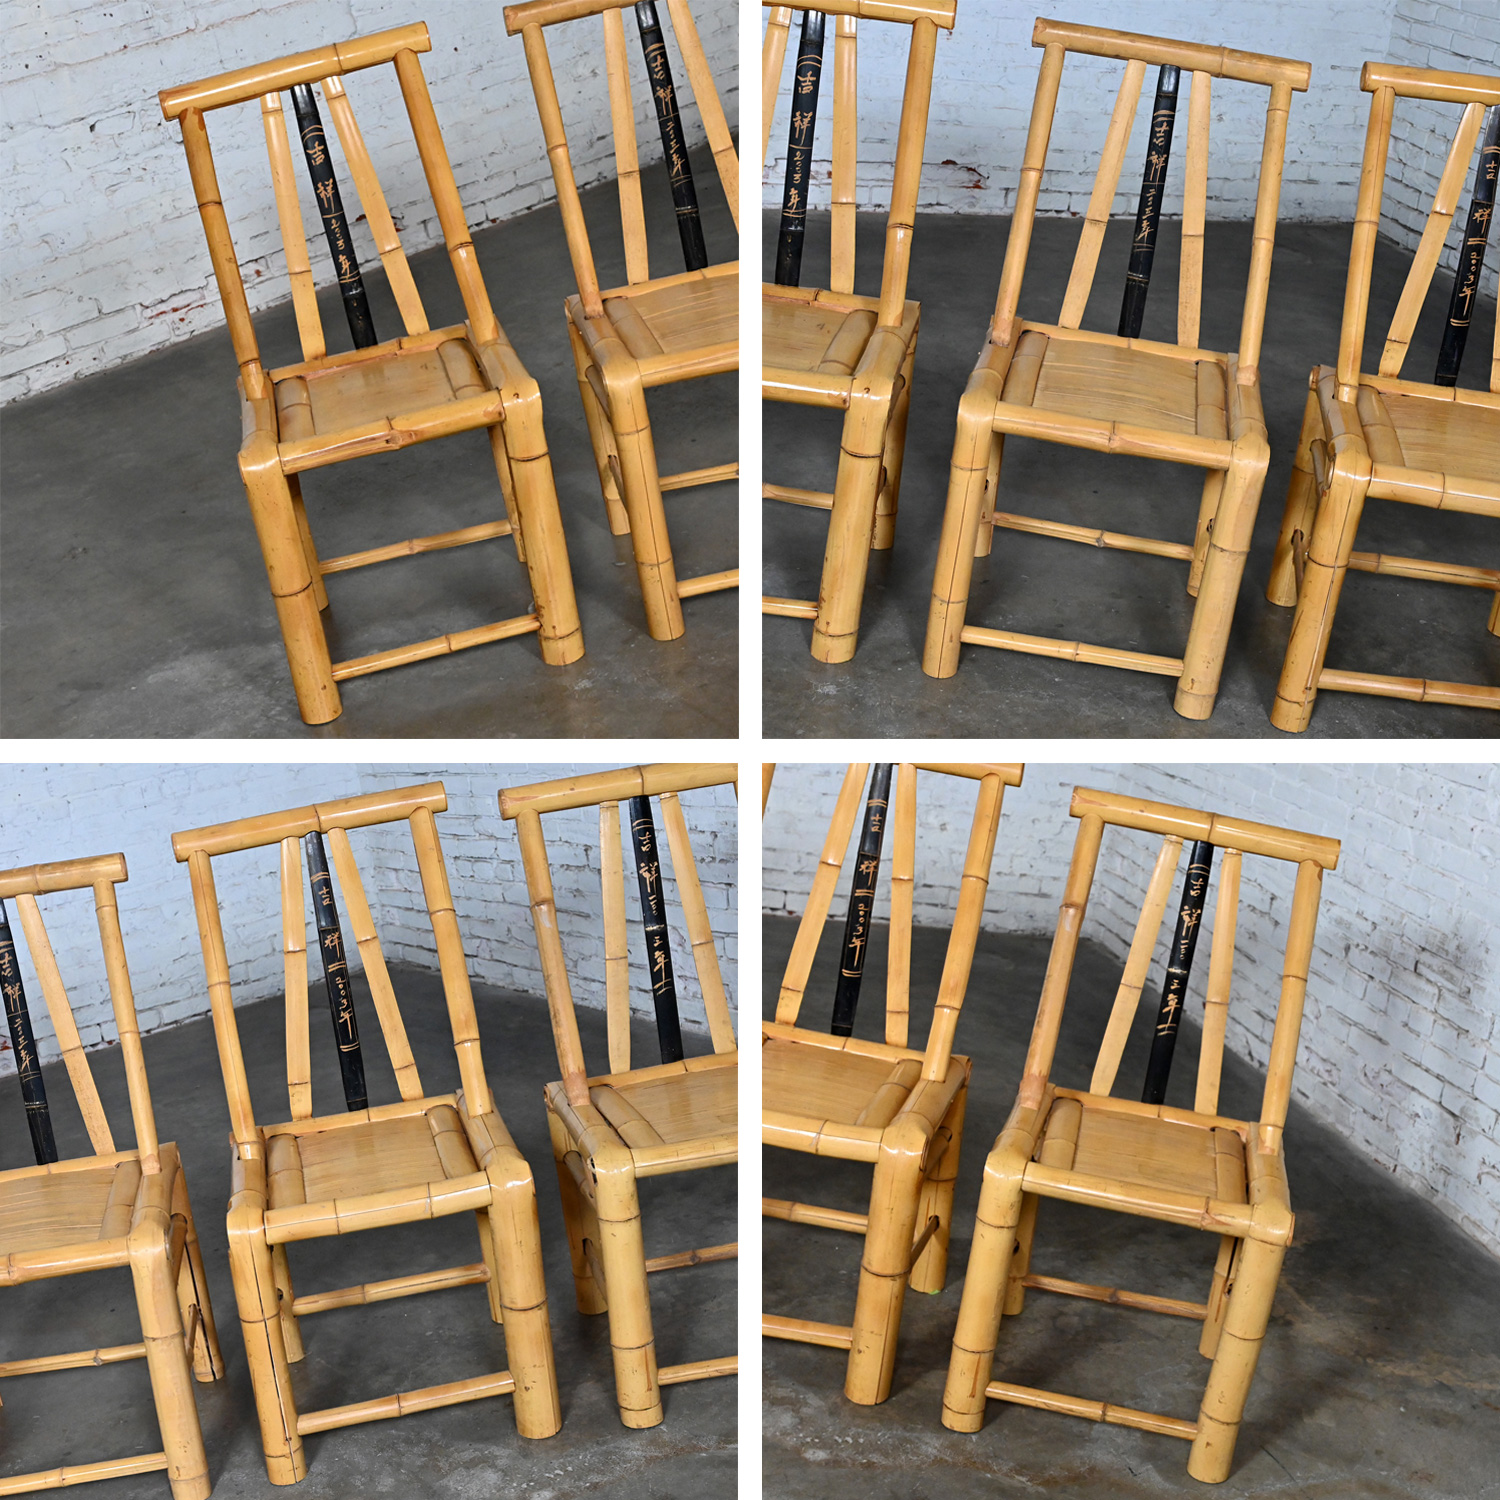 Mid to Late 20th Century Chinoiserie Natural Bamboo Asian Dining Chairs Set of 4